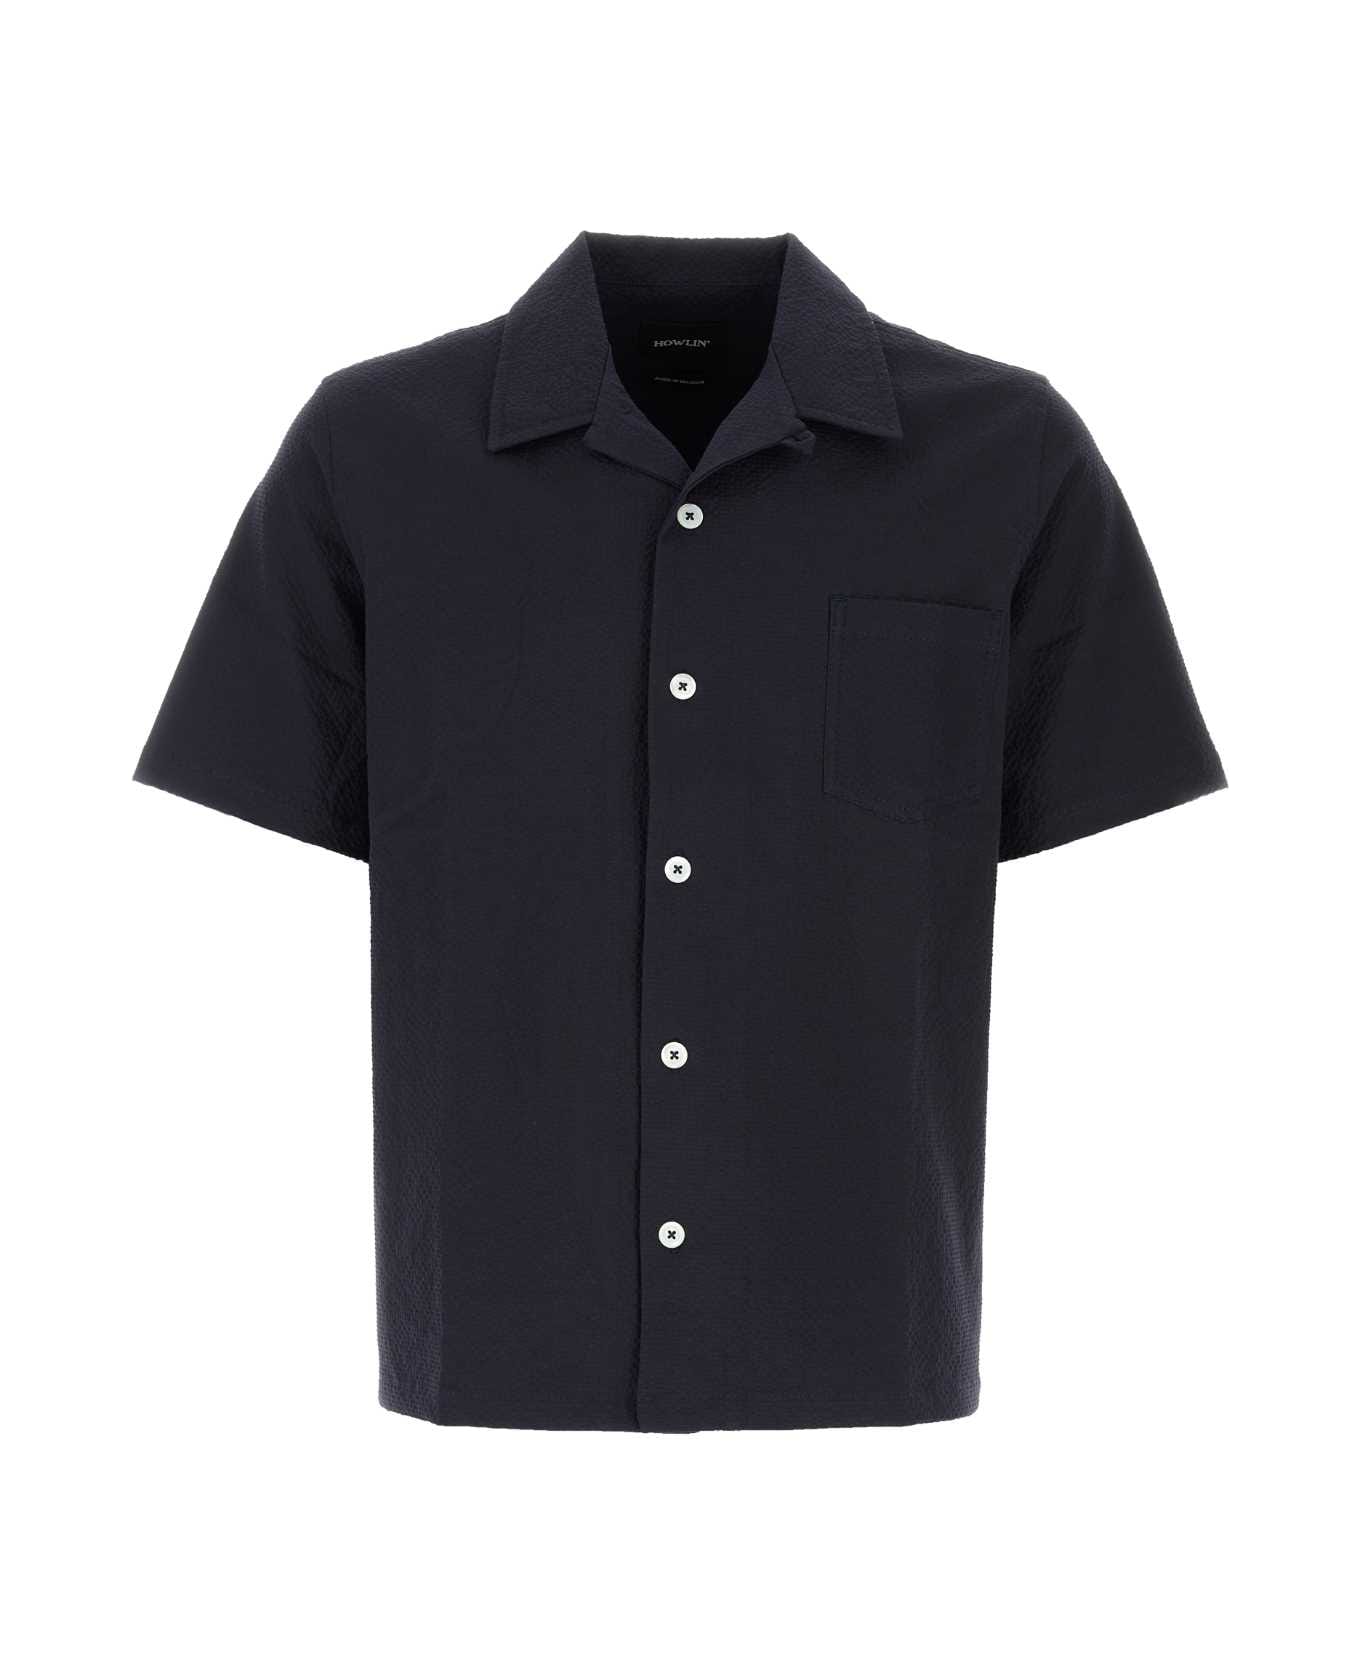 Howlin Navy Blue Stretch Cotton Cocktail Shirt - NAVY  シャツ